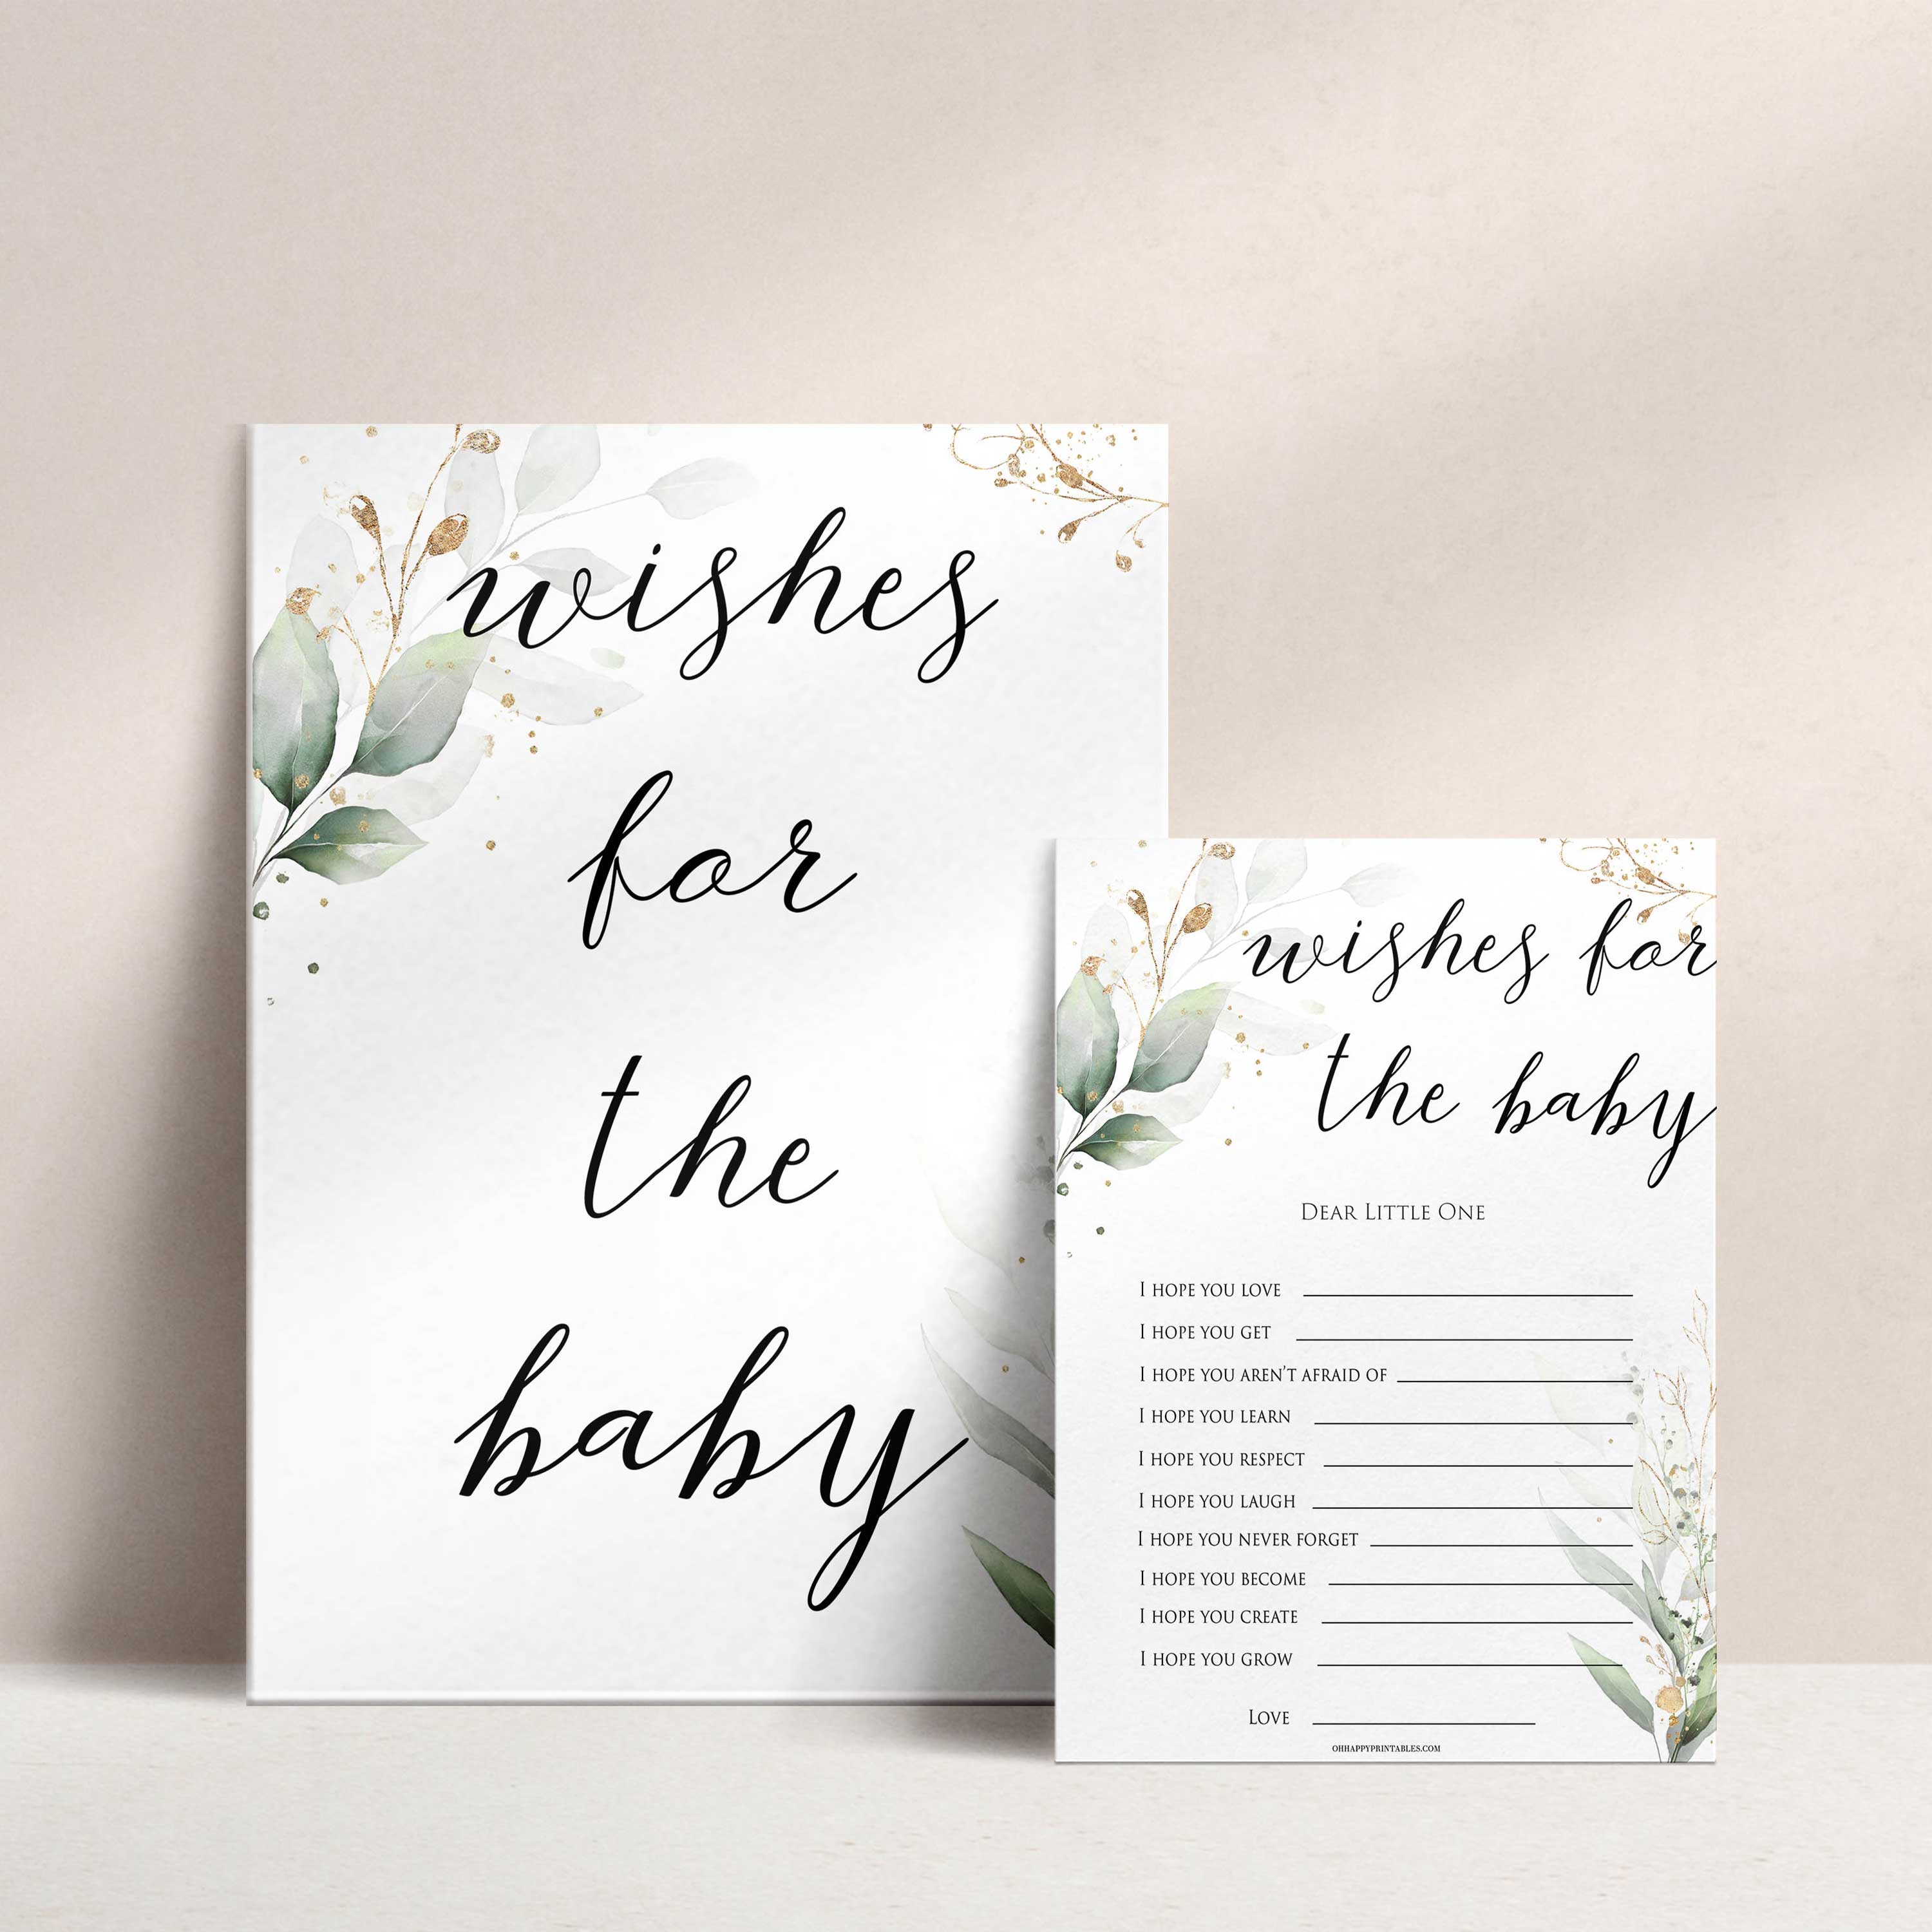  Gold green leaf baby games, wishes for the baby, printable baby games, fun baby games, top baby games to play, gold leaf baby shower, greenery baby shower ideas